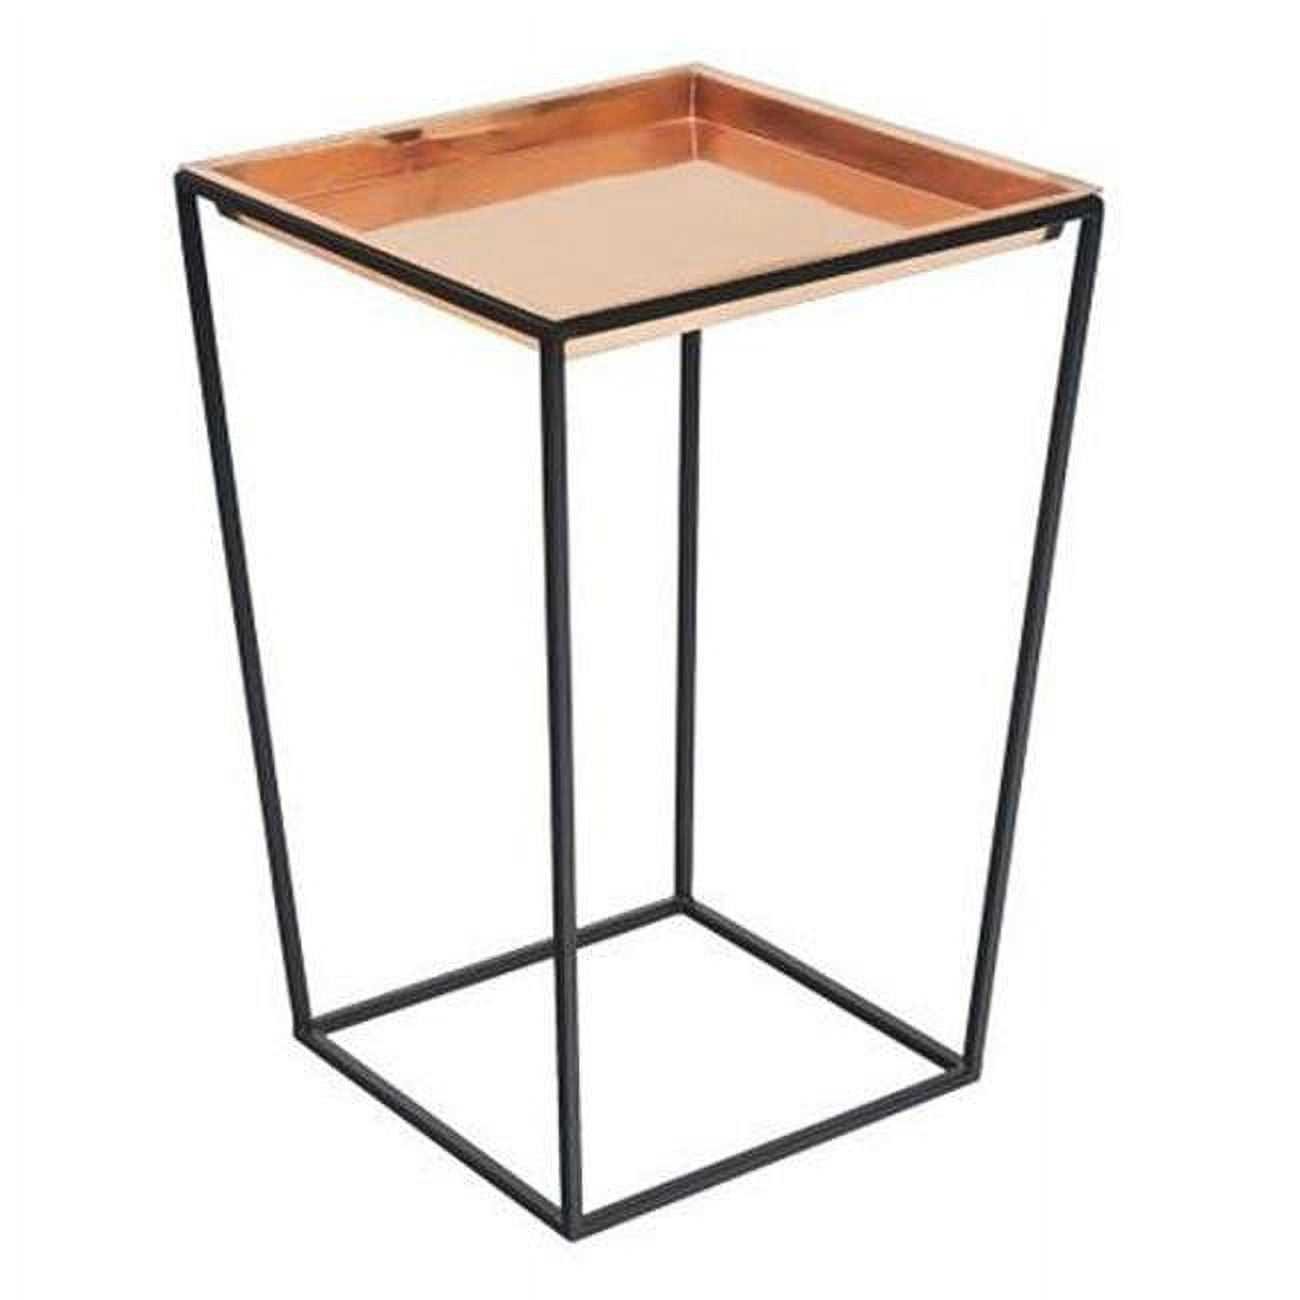 Achla Fb-46c Arne Stand With Copper Tray, Tall